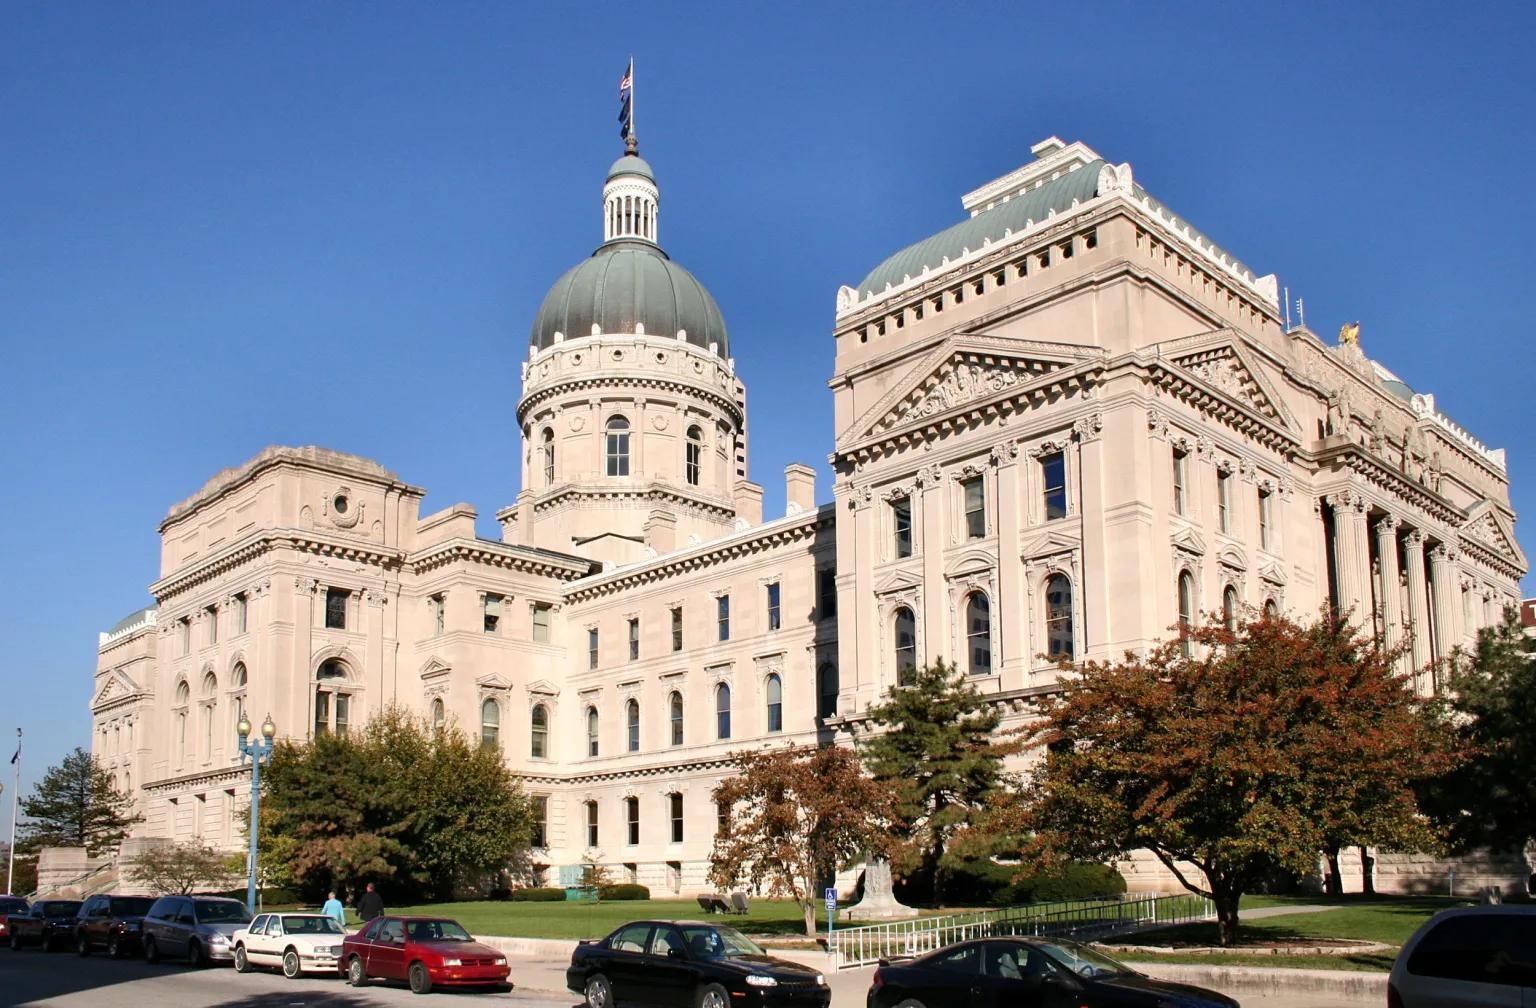 Indiana gets up to $99.1 million in funding for startups and small businesses